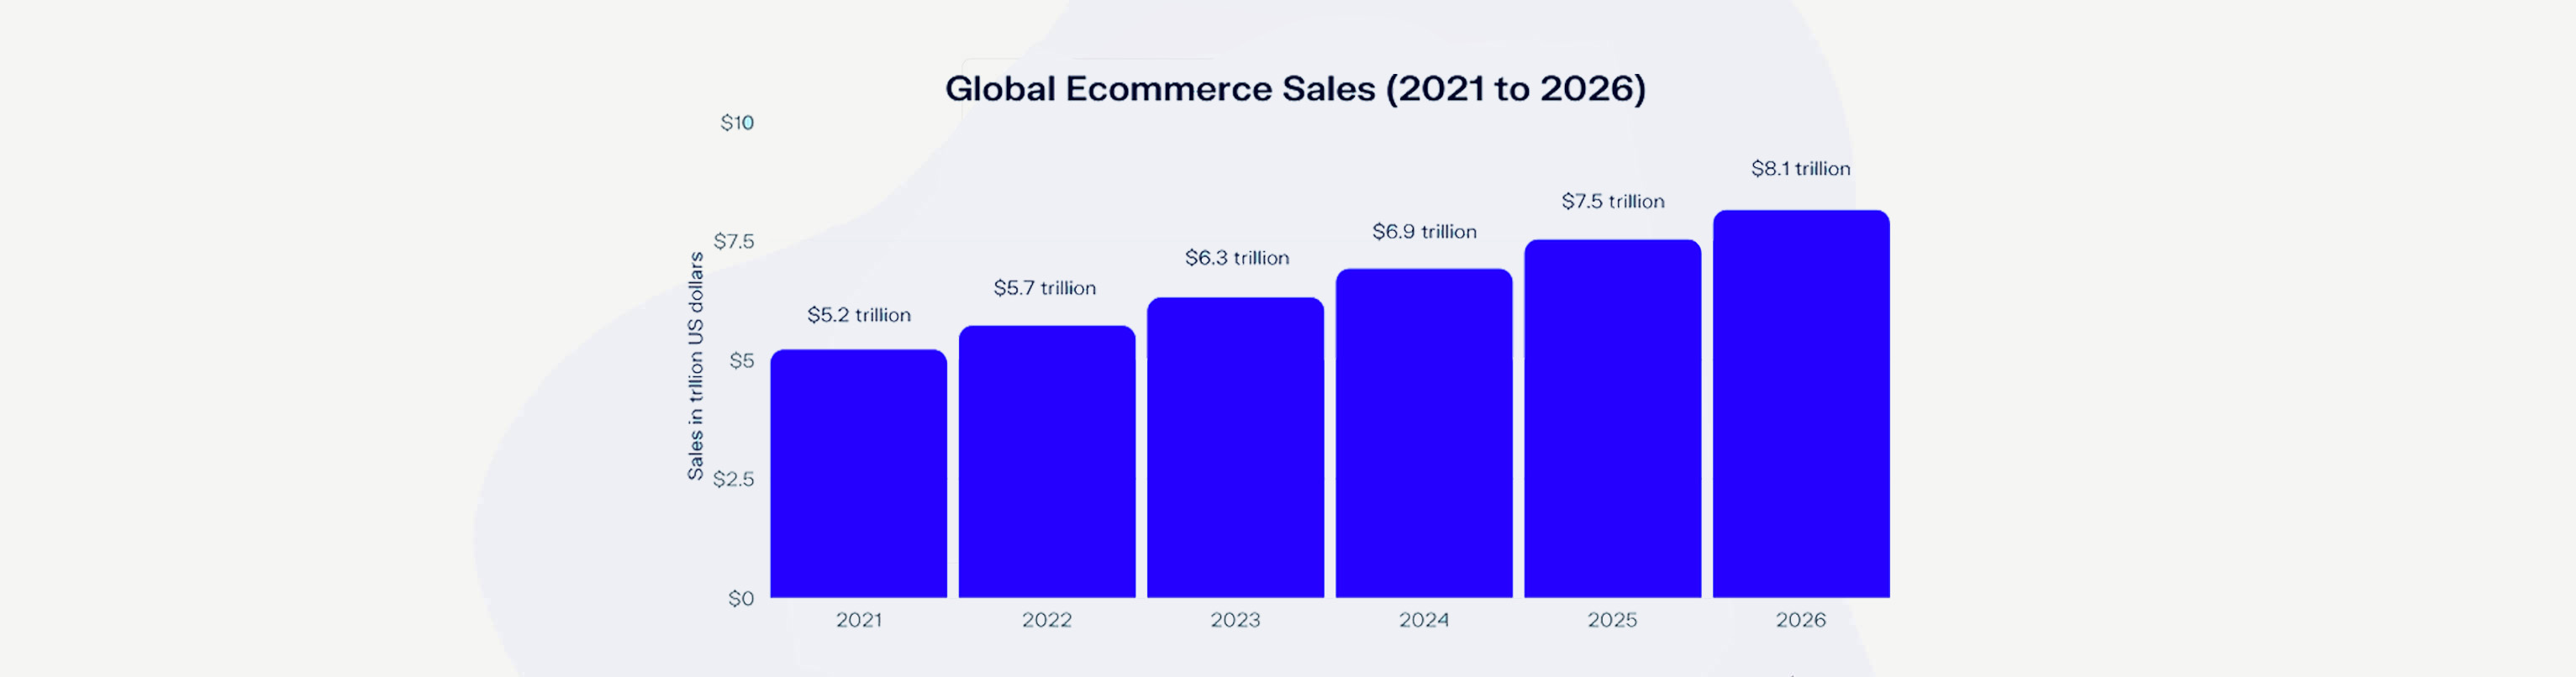 Global Ecommerce Growth and Statistics You Ought to Watch